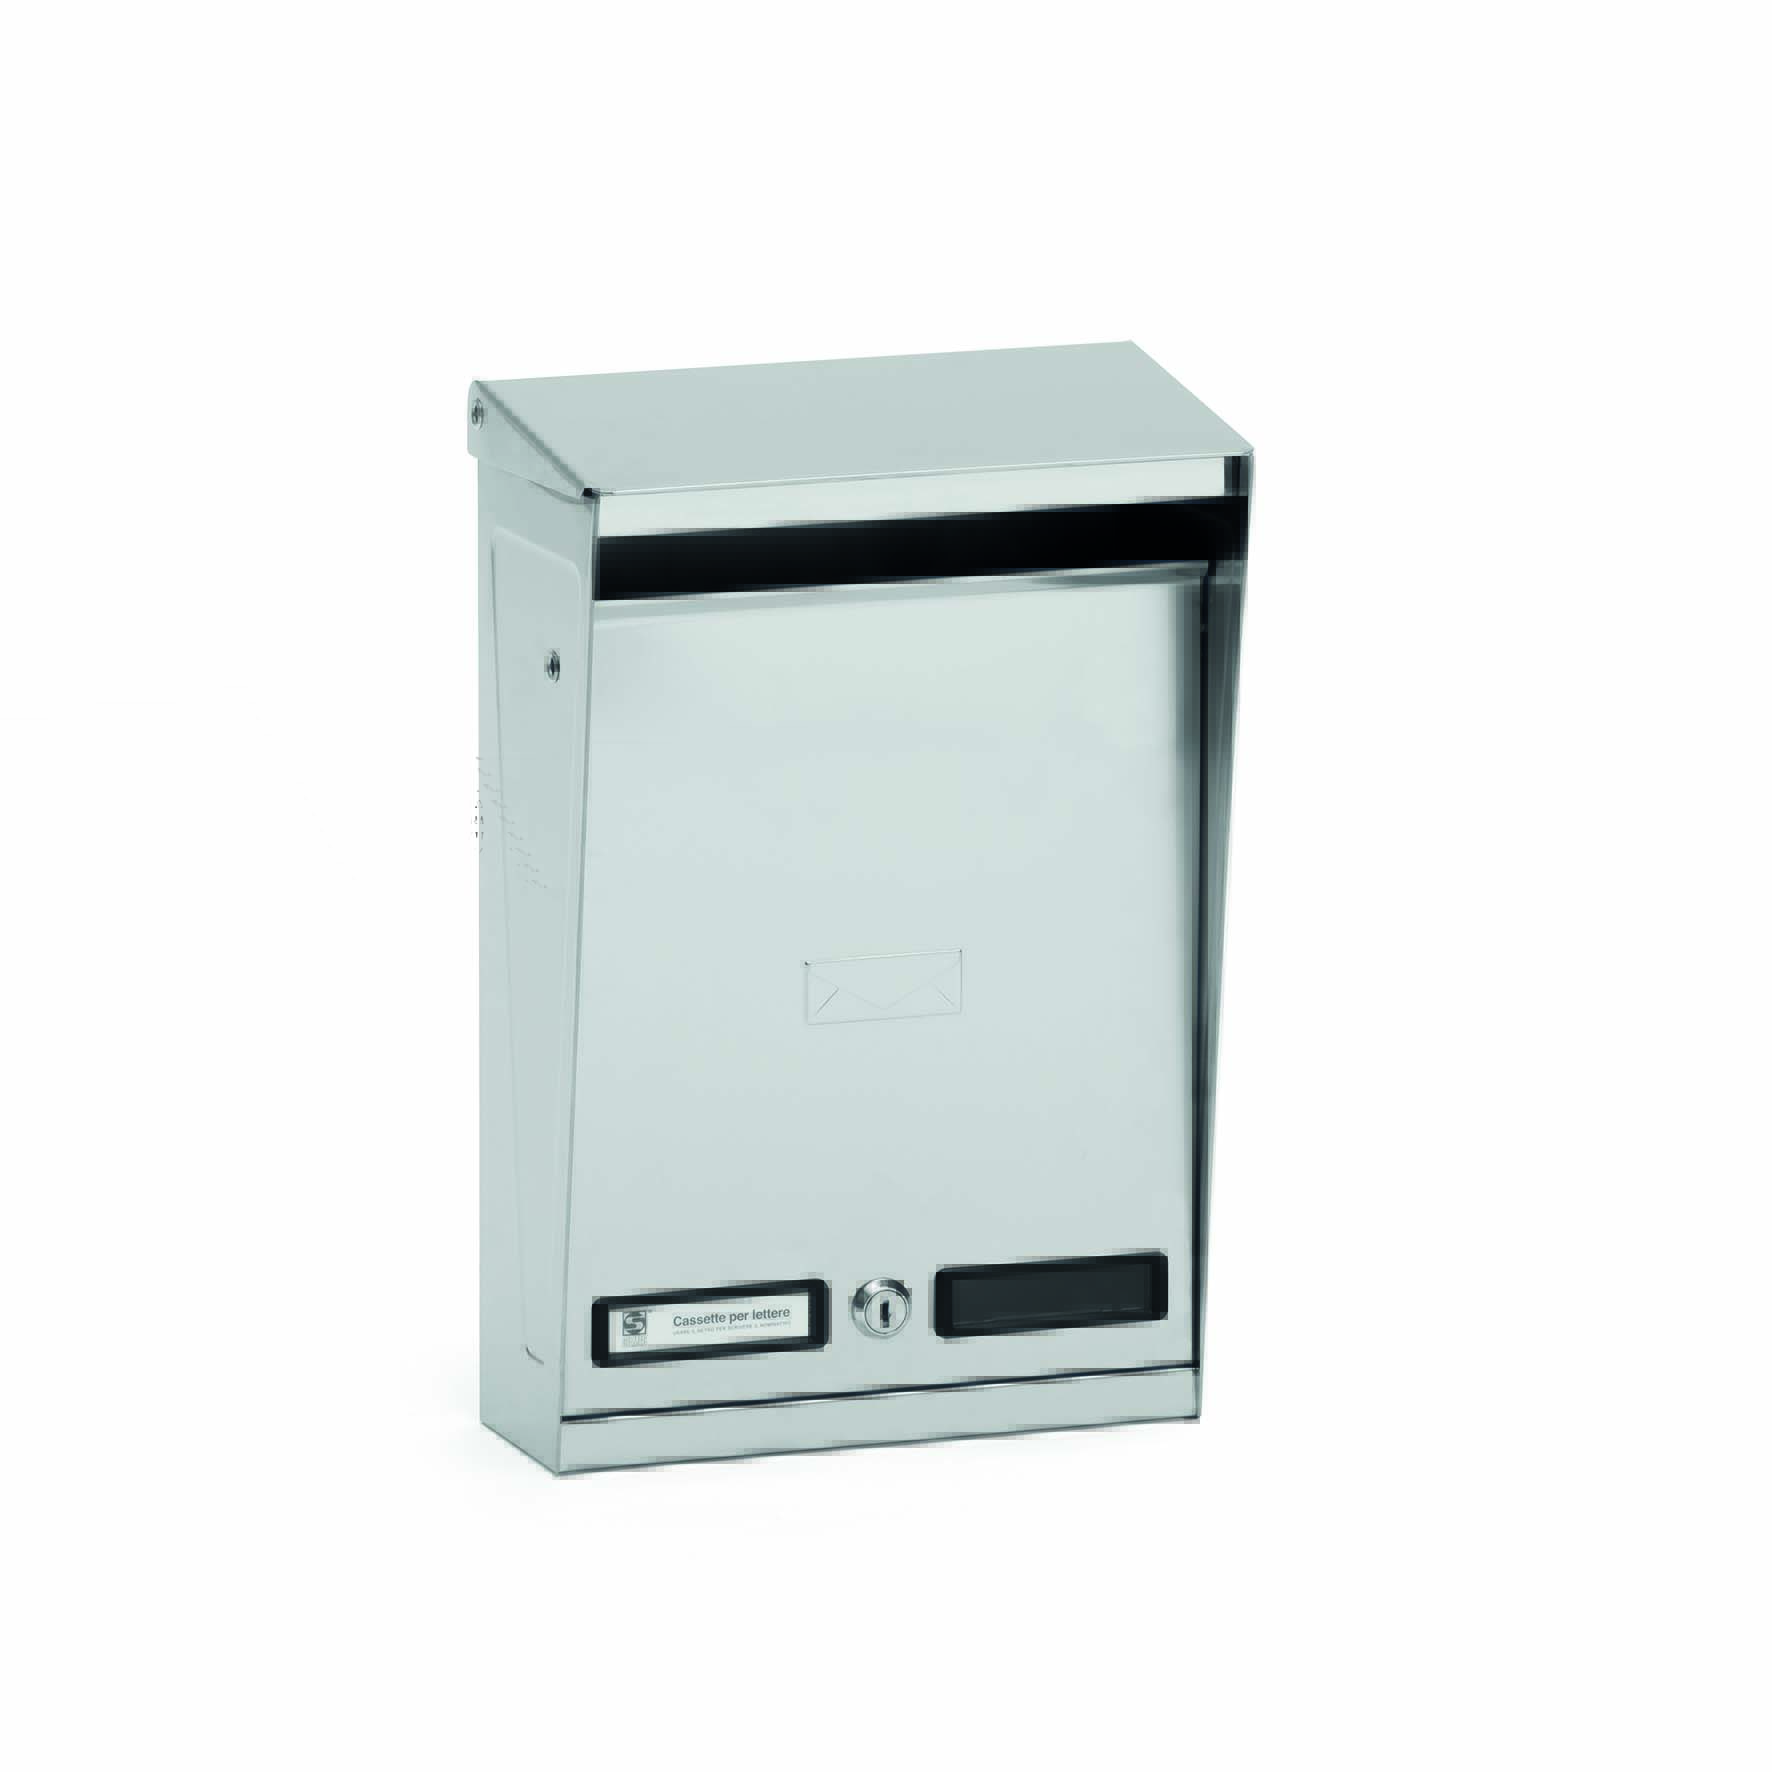 S012 letterbox with openable weather shield